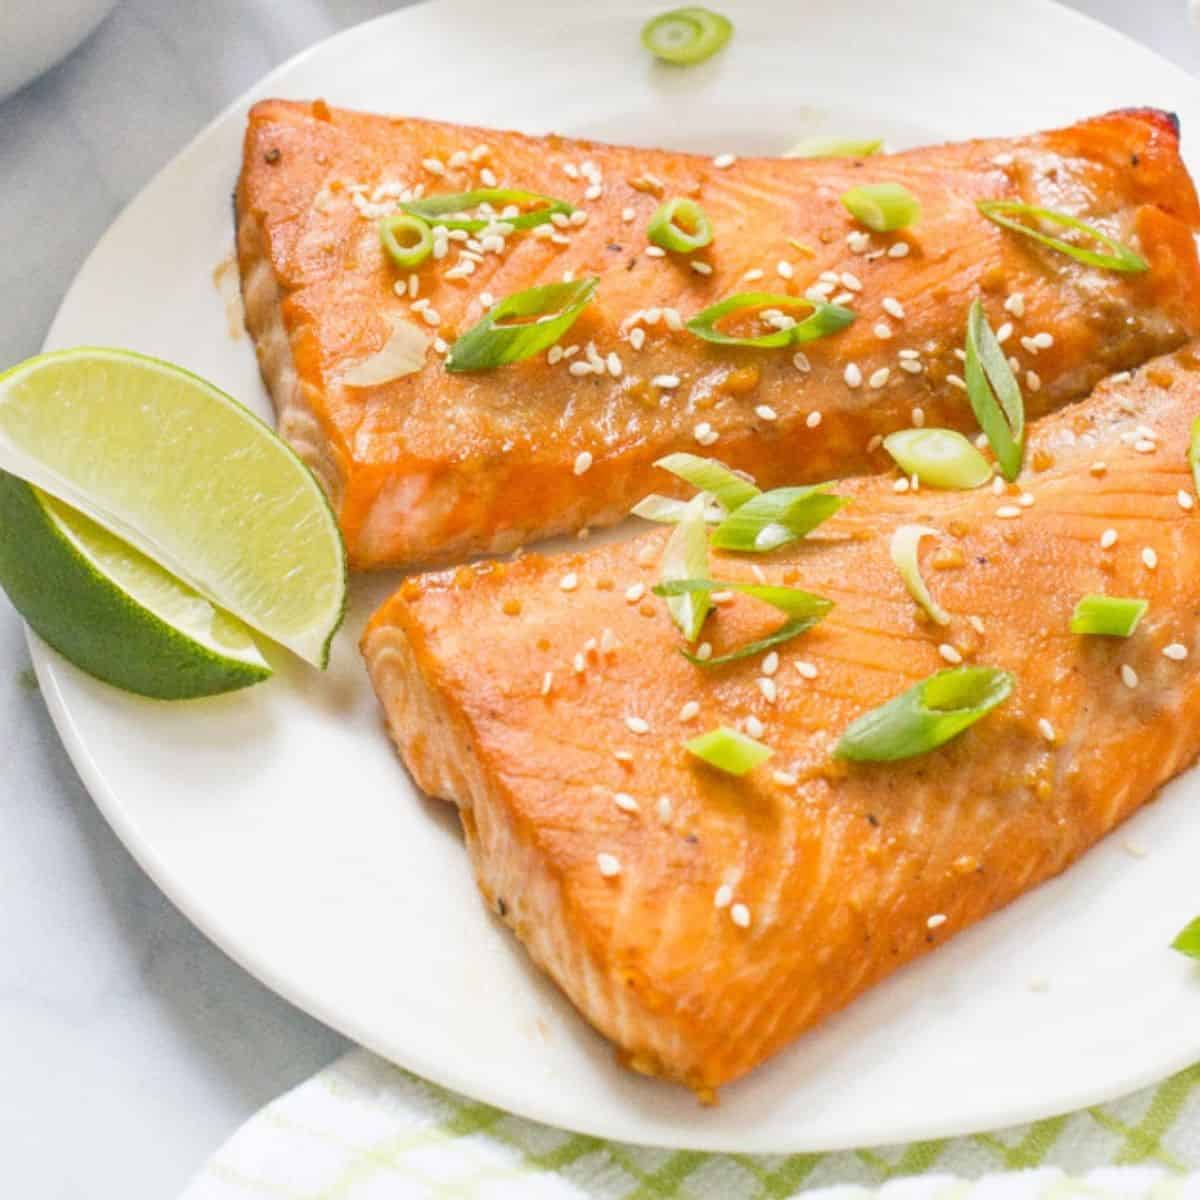 Two cooked salmon filets with a bourbon marinade on a white plate with lme wedges to the side and sesame seeds and green onions sprinkled on top.